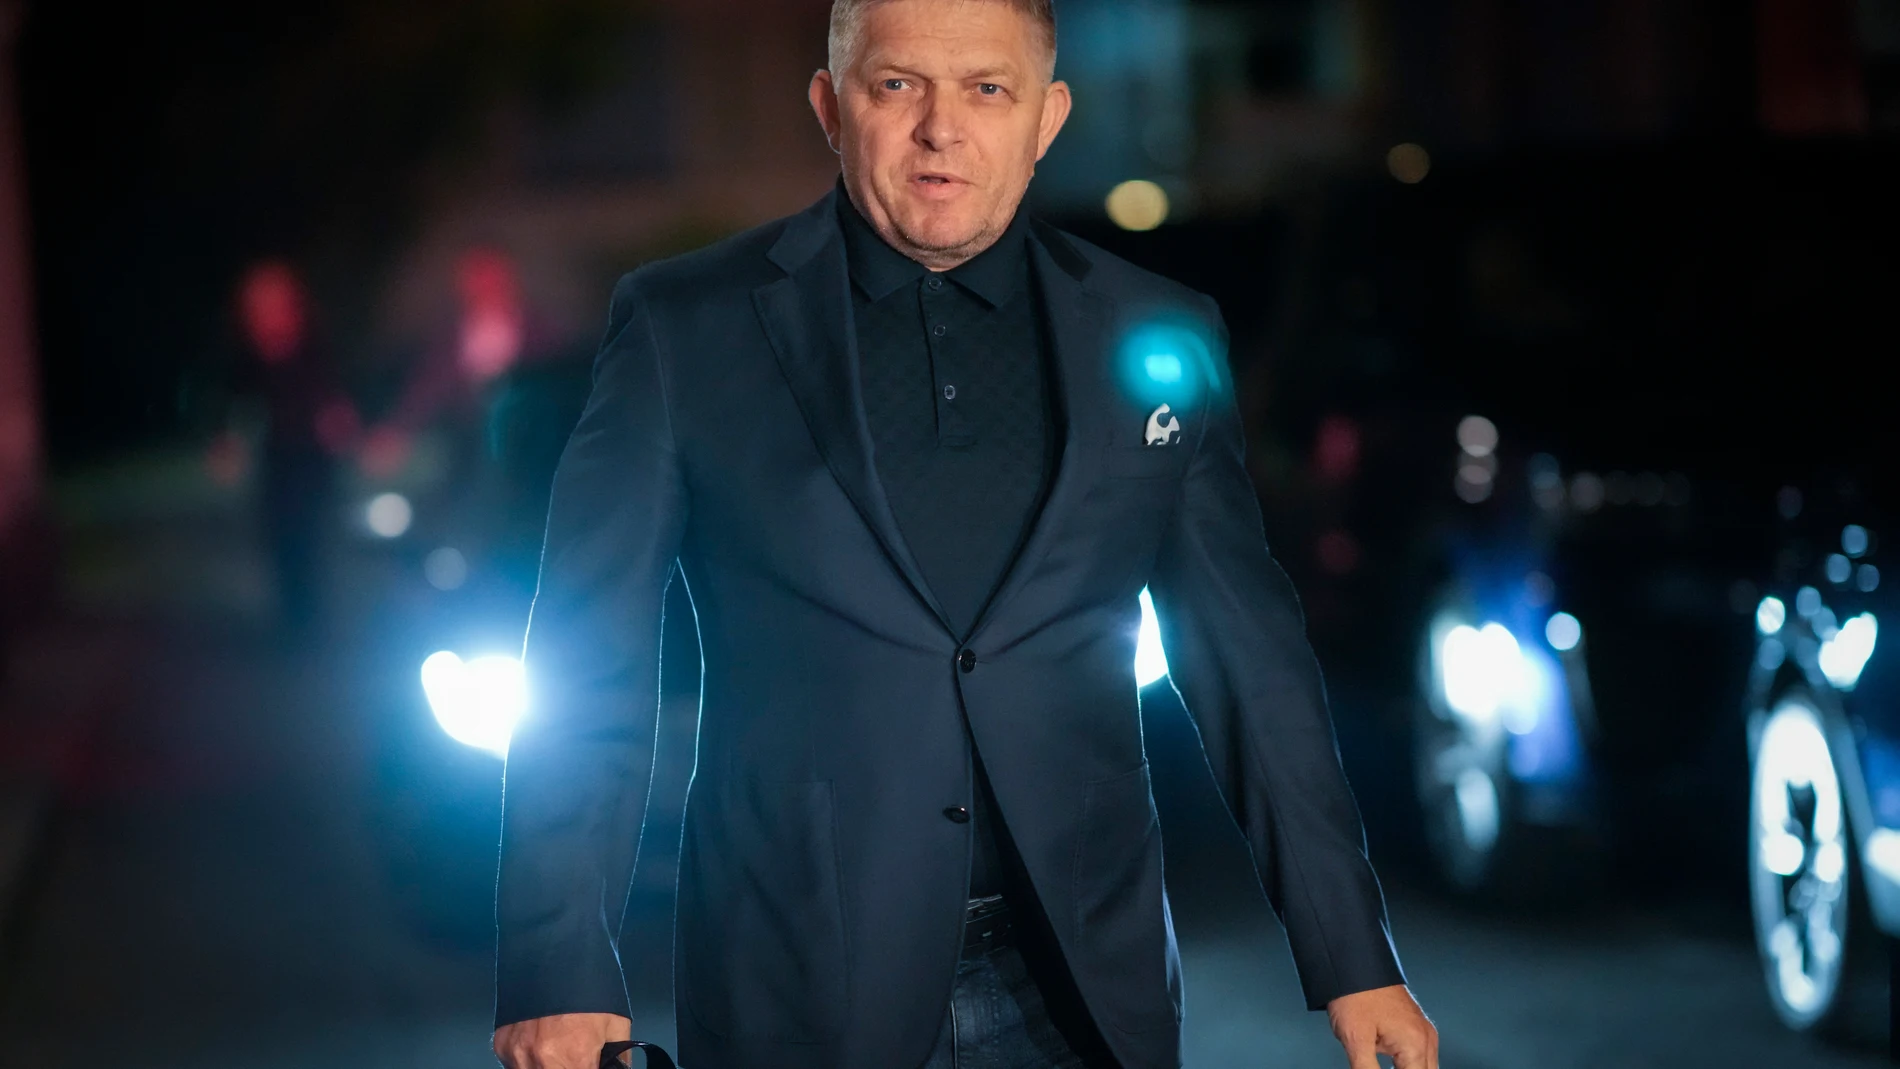 Former Prime Minister Robert Fico arrives to his party's headquarters after polling stations closed for an early parliamentary election, in Bratislava, Slovakia, Saturday, Sept. 30, 2023. (AP Photo/Darko Bandic)